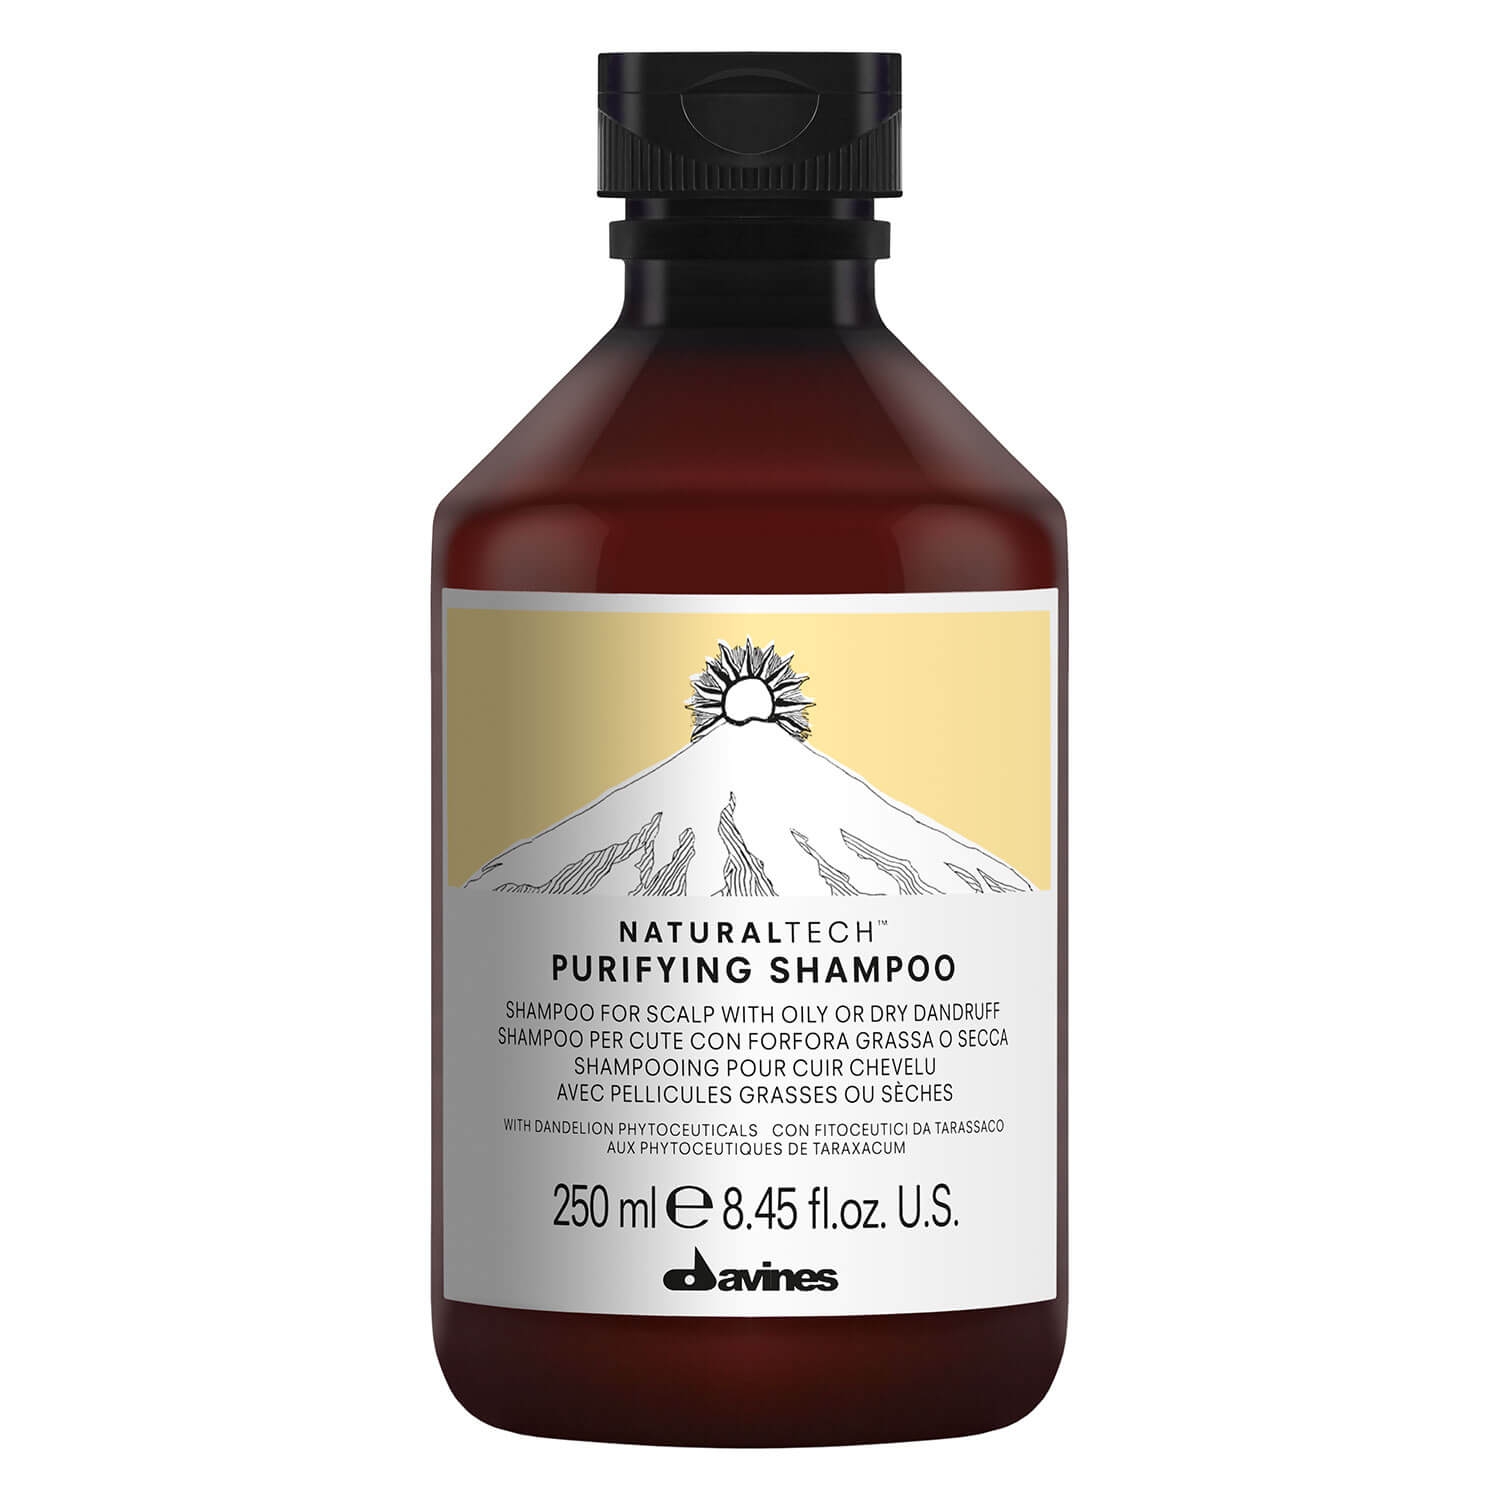 Product image from Naturaltech - Purifying Shampoo